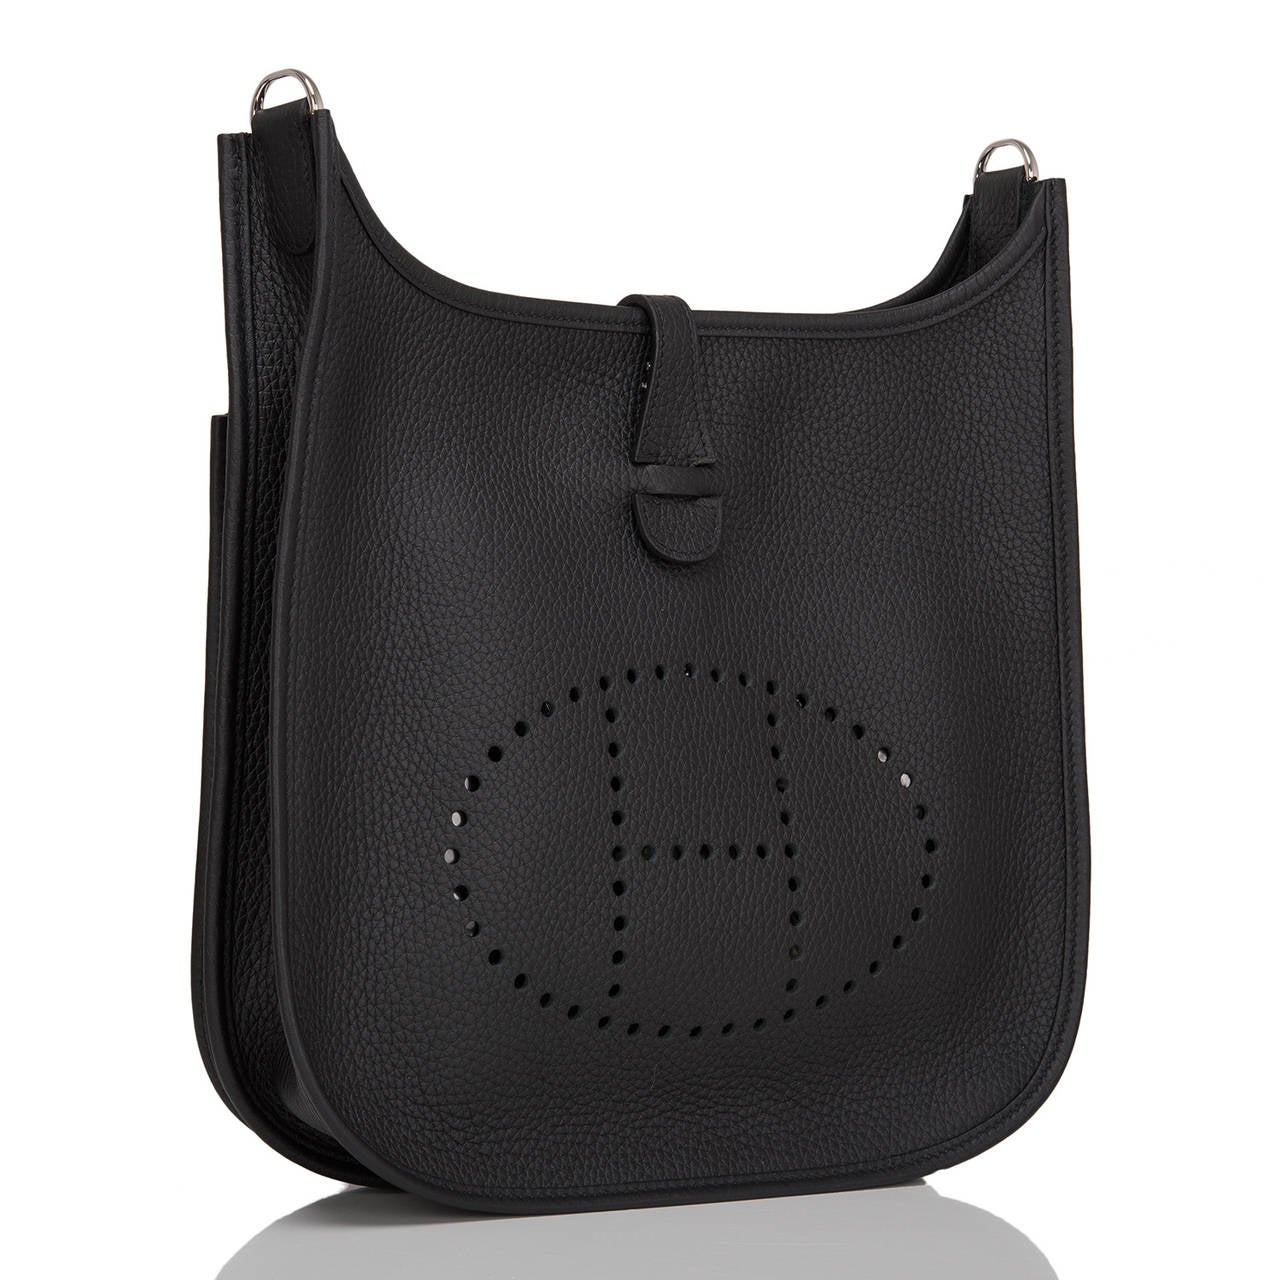 Hermes Black Evelyne III PM in clemence leather with palladium hardware.

This Evelyne III is made in one of the most desired colorways -- black -- in rich clemence leather and has palladium hardware, tonal stitching, large perforated H icon in